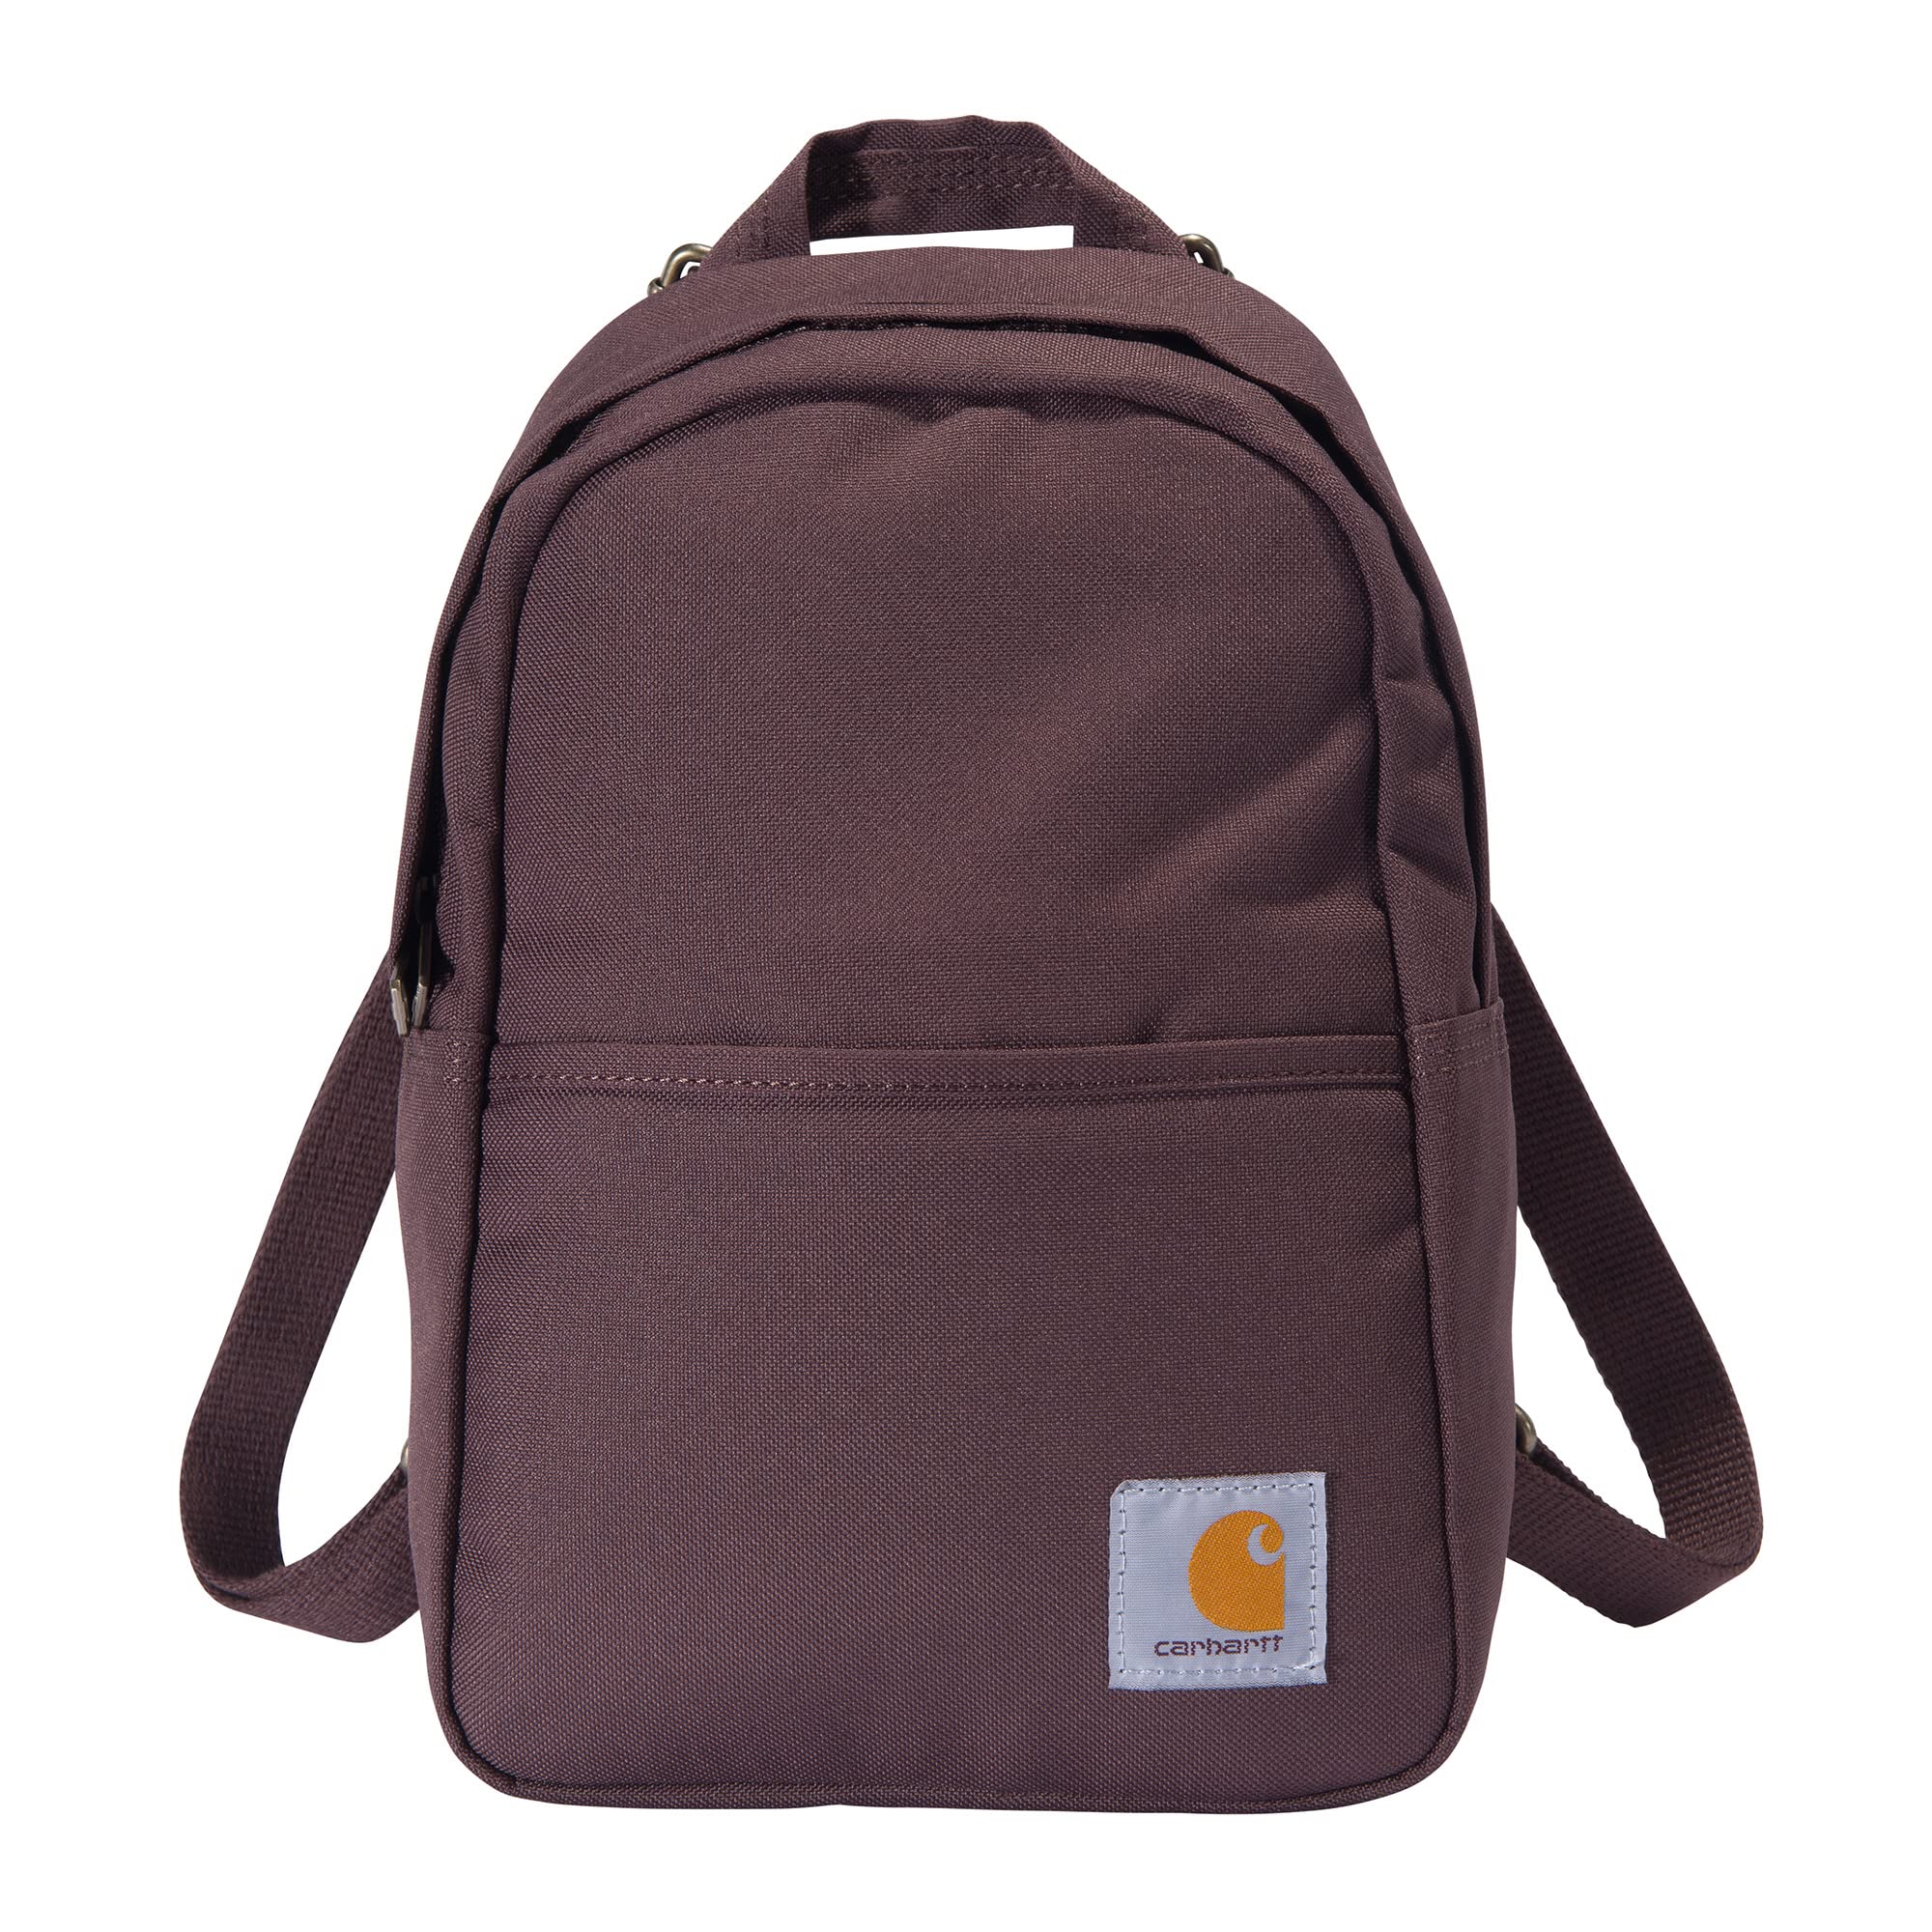 Carhartt Classic Mini Backpack, Durable, Water-Resistant Backpack with Adjustable Shoulder Straps, Wine